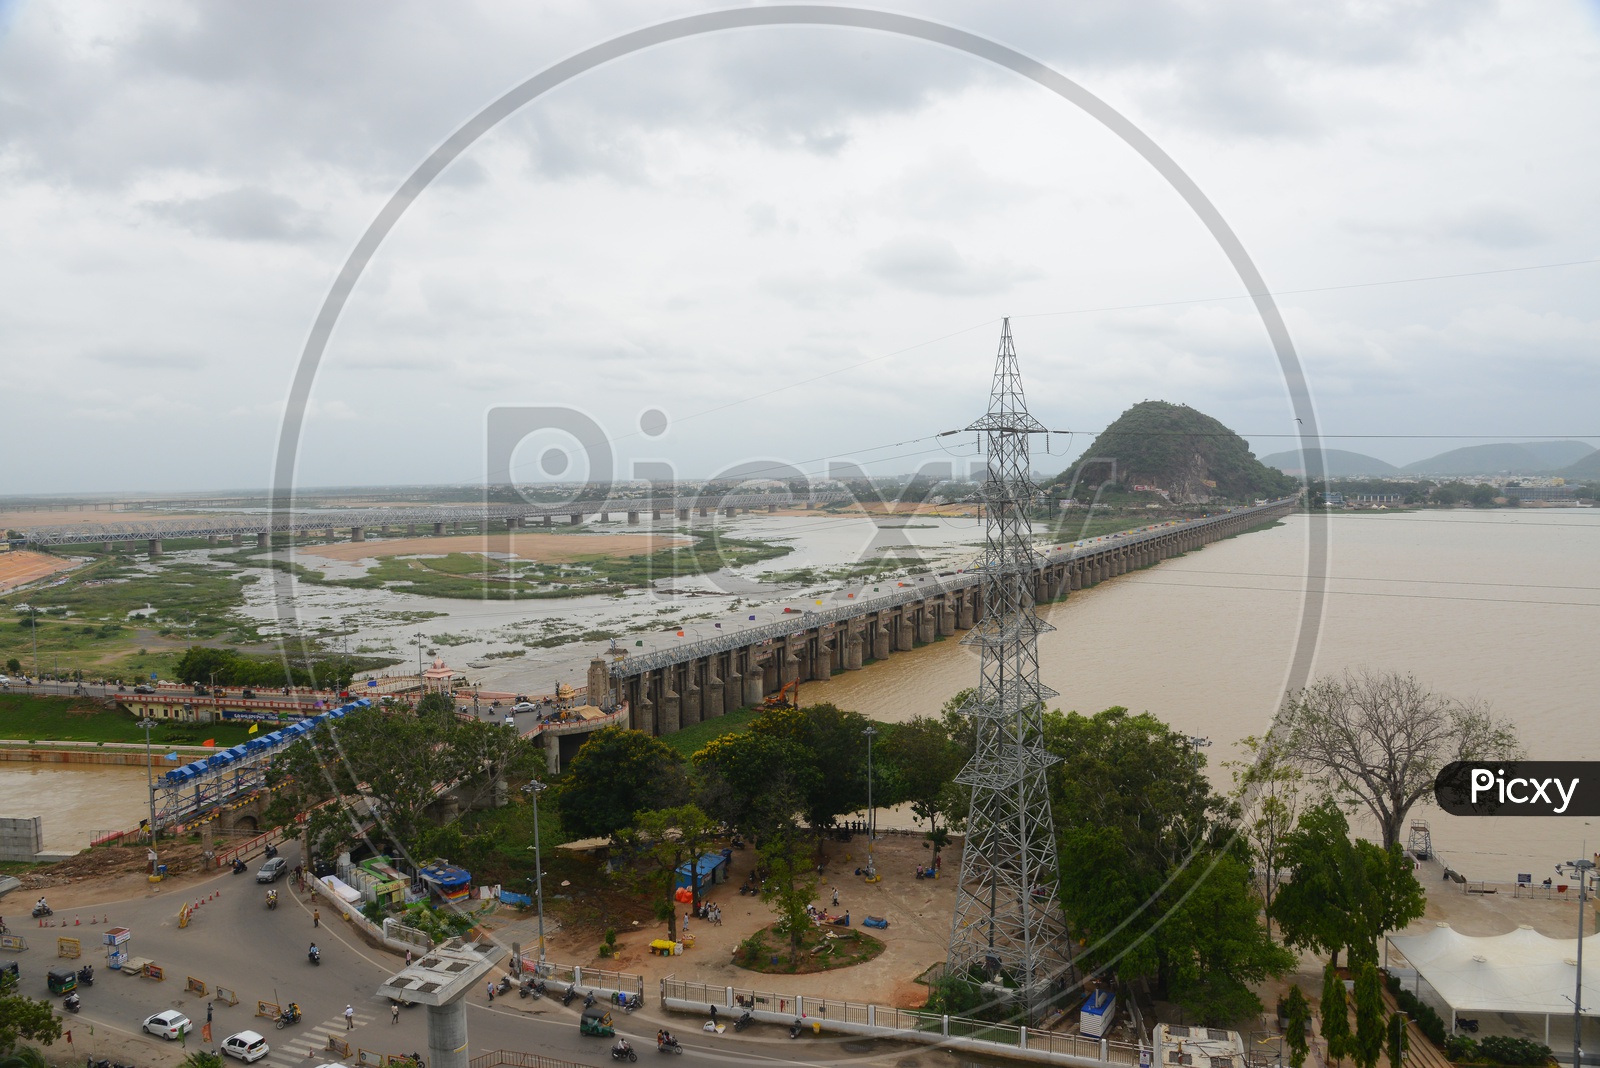 Ariel view of the praksam barrage over Krishna river and traffic in Vijayawada .Gates opened/lifted.